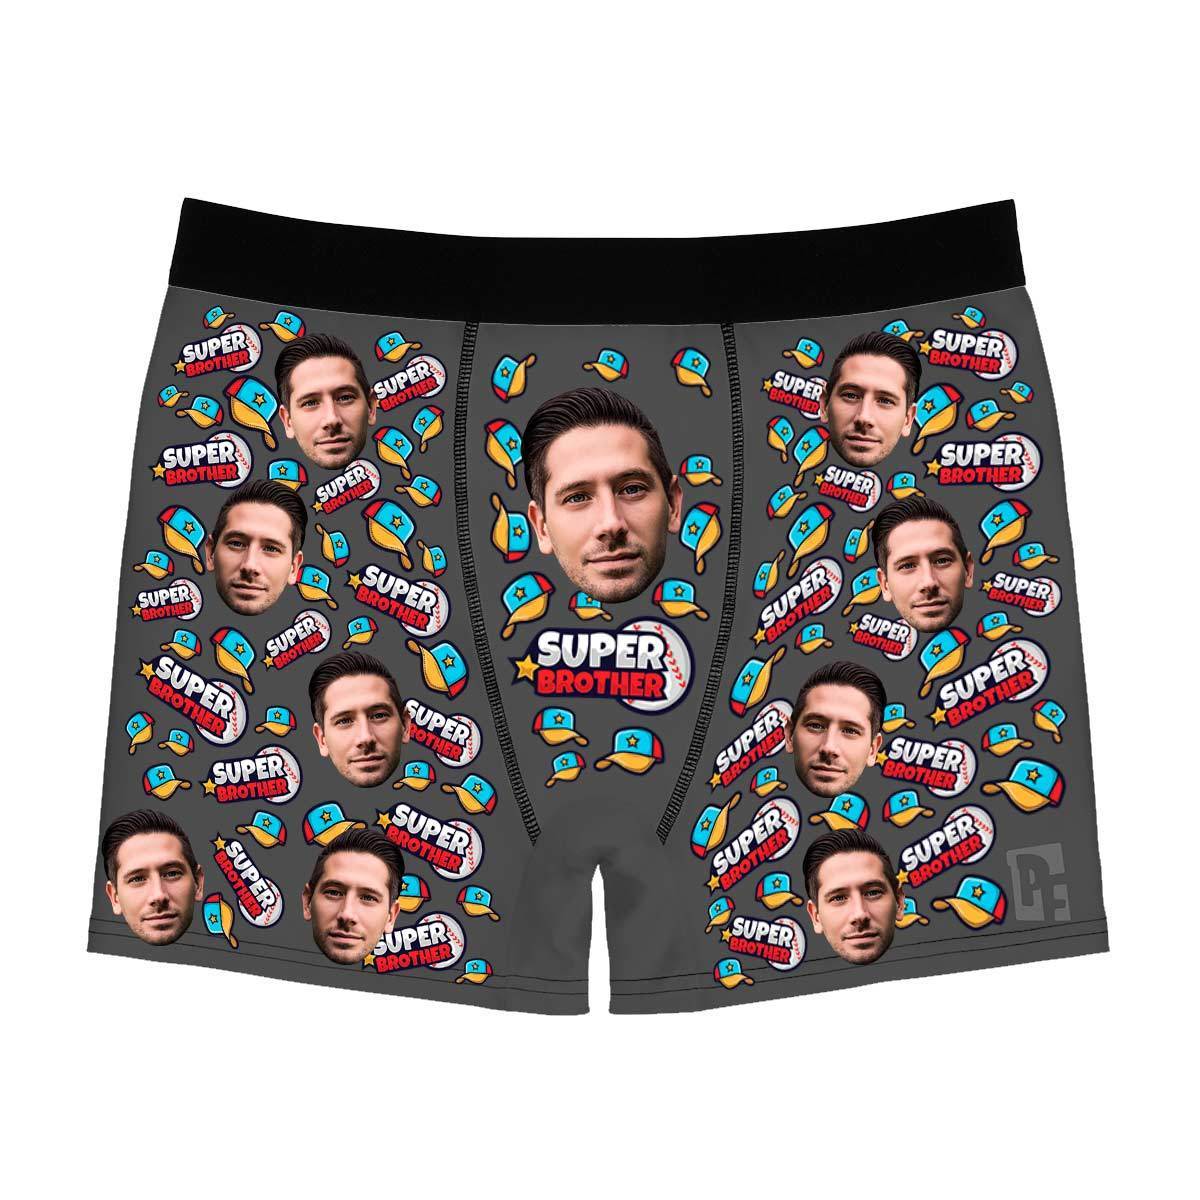 Dark Super Brother men's boxer briefs personalized with photo printed on them